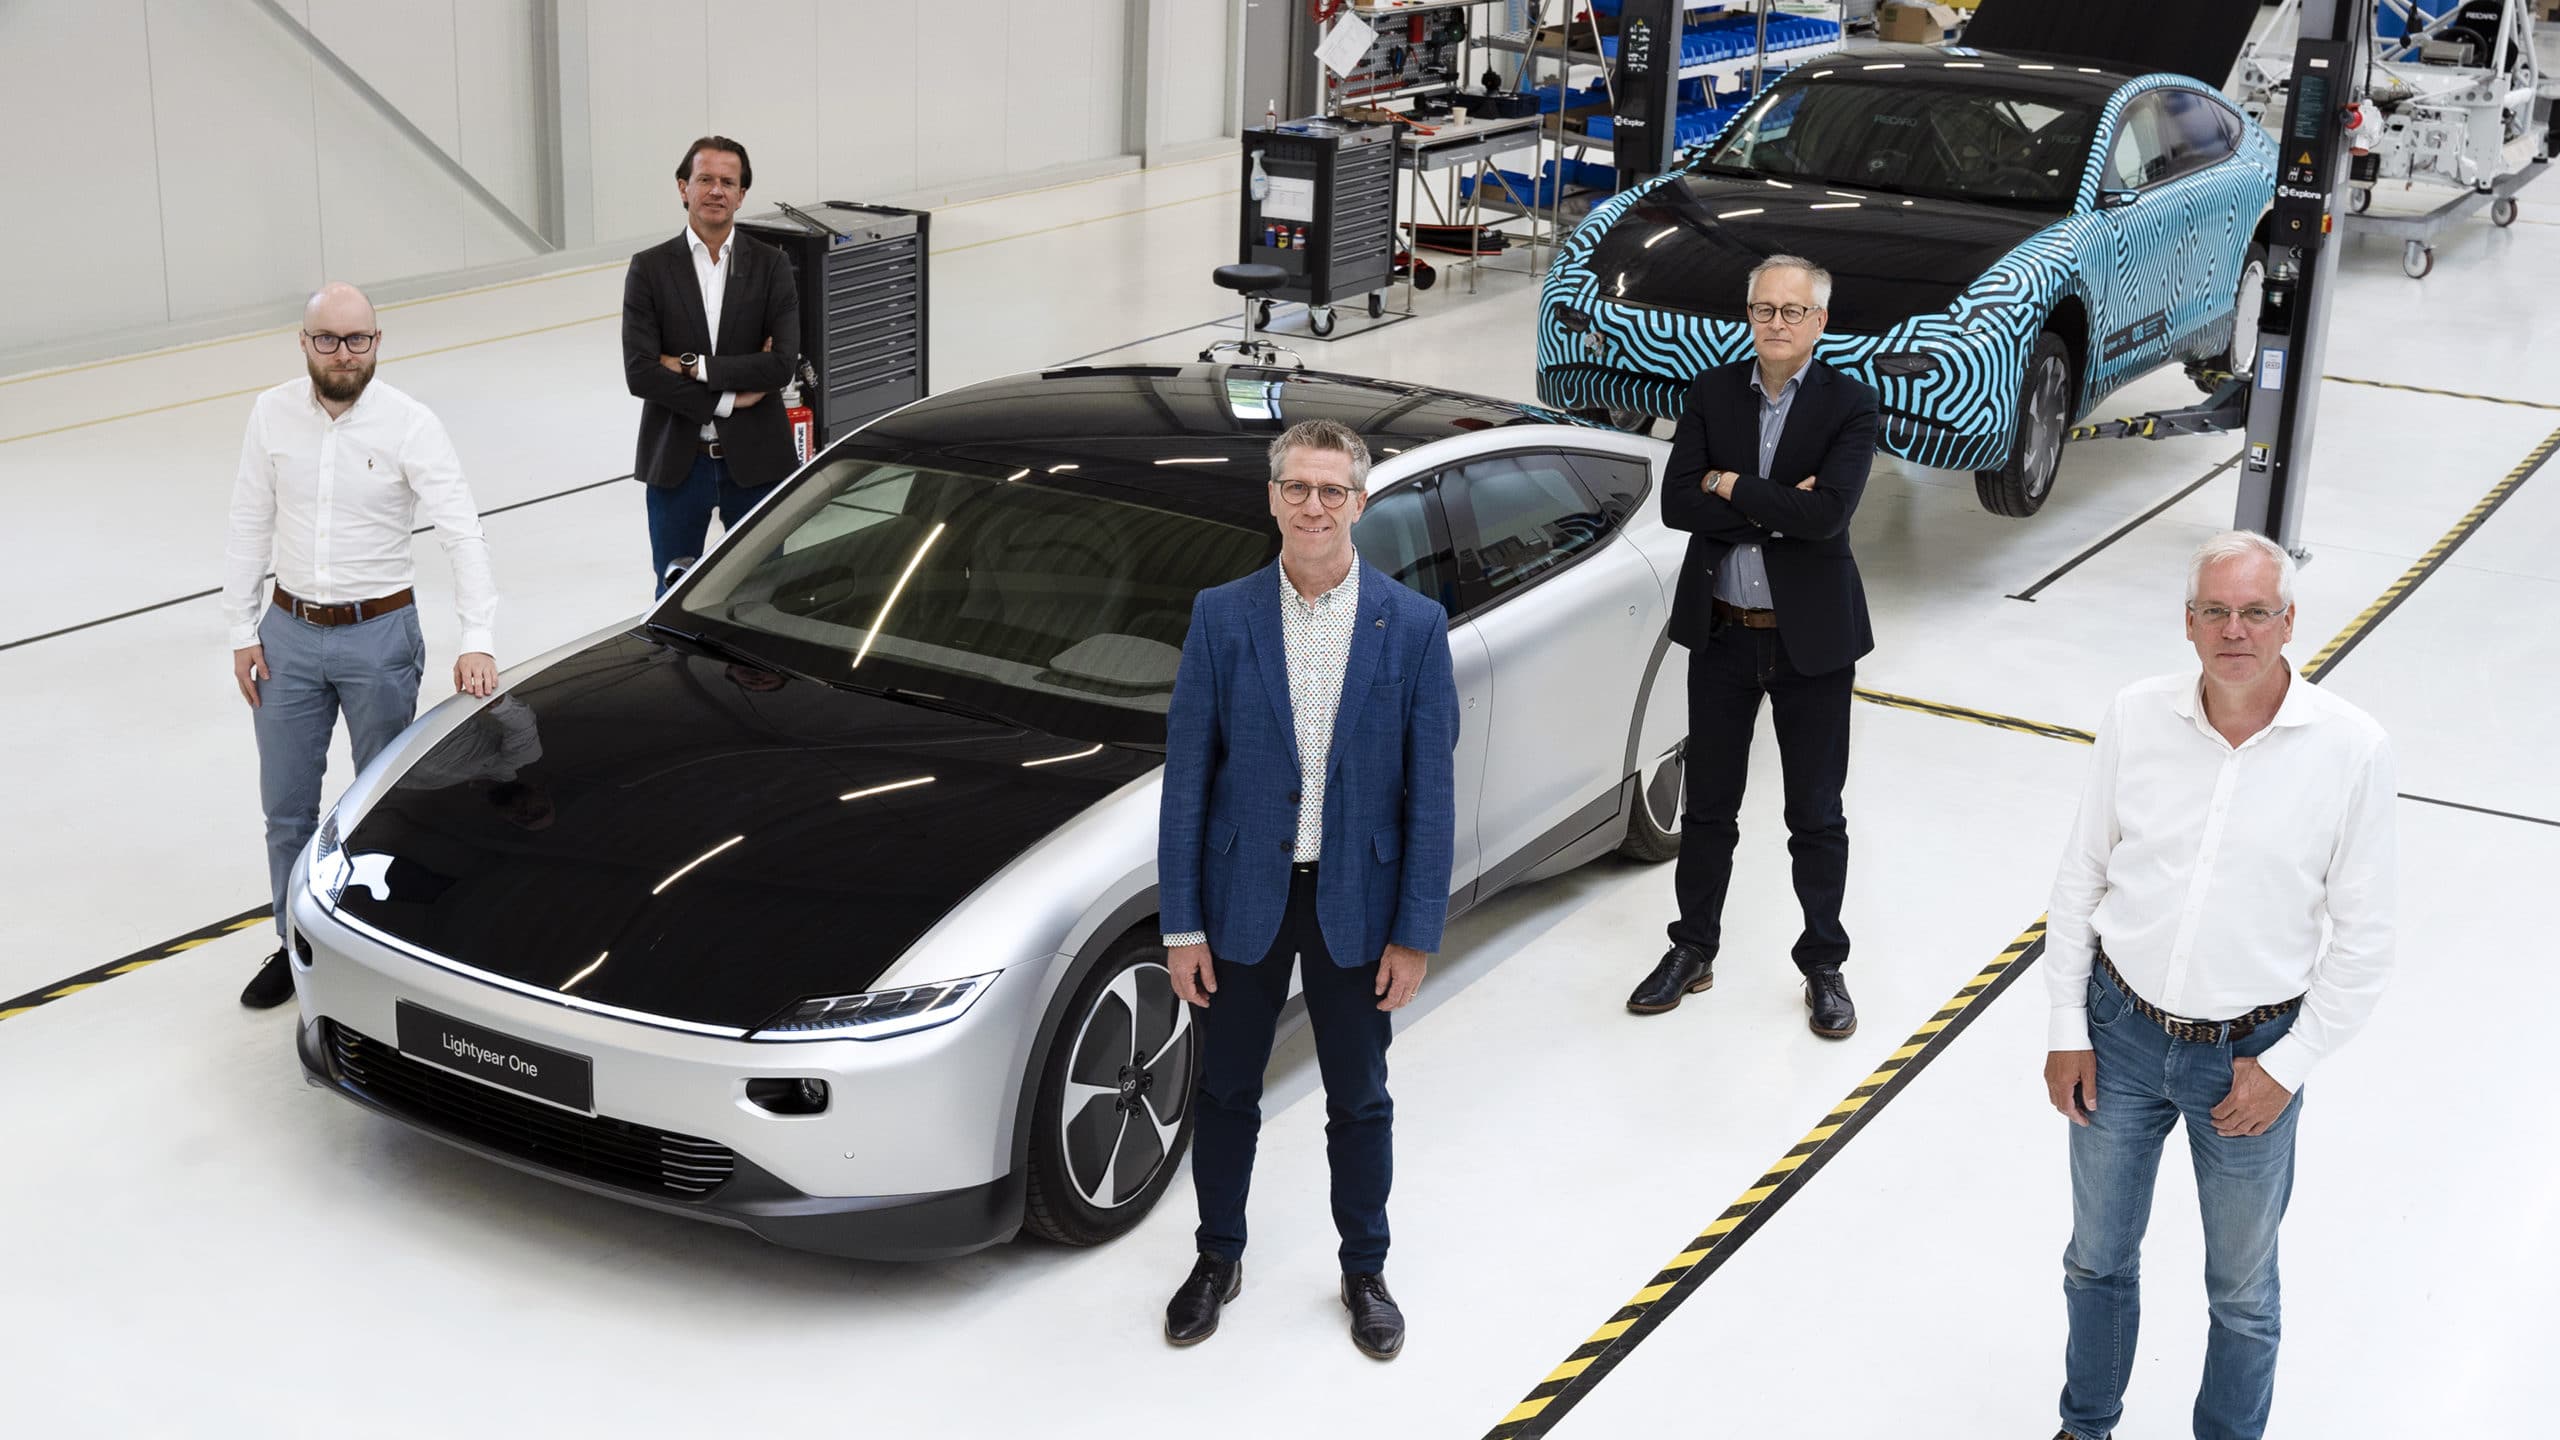 Valmet Automotive entering into manufacturing contract with EV brand Lightyear